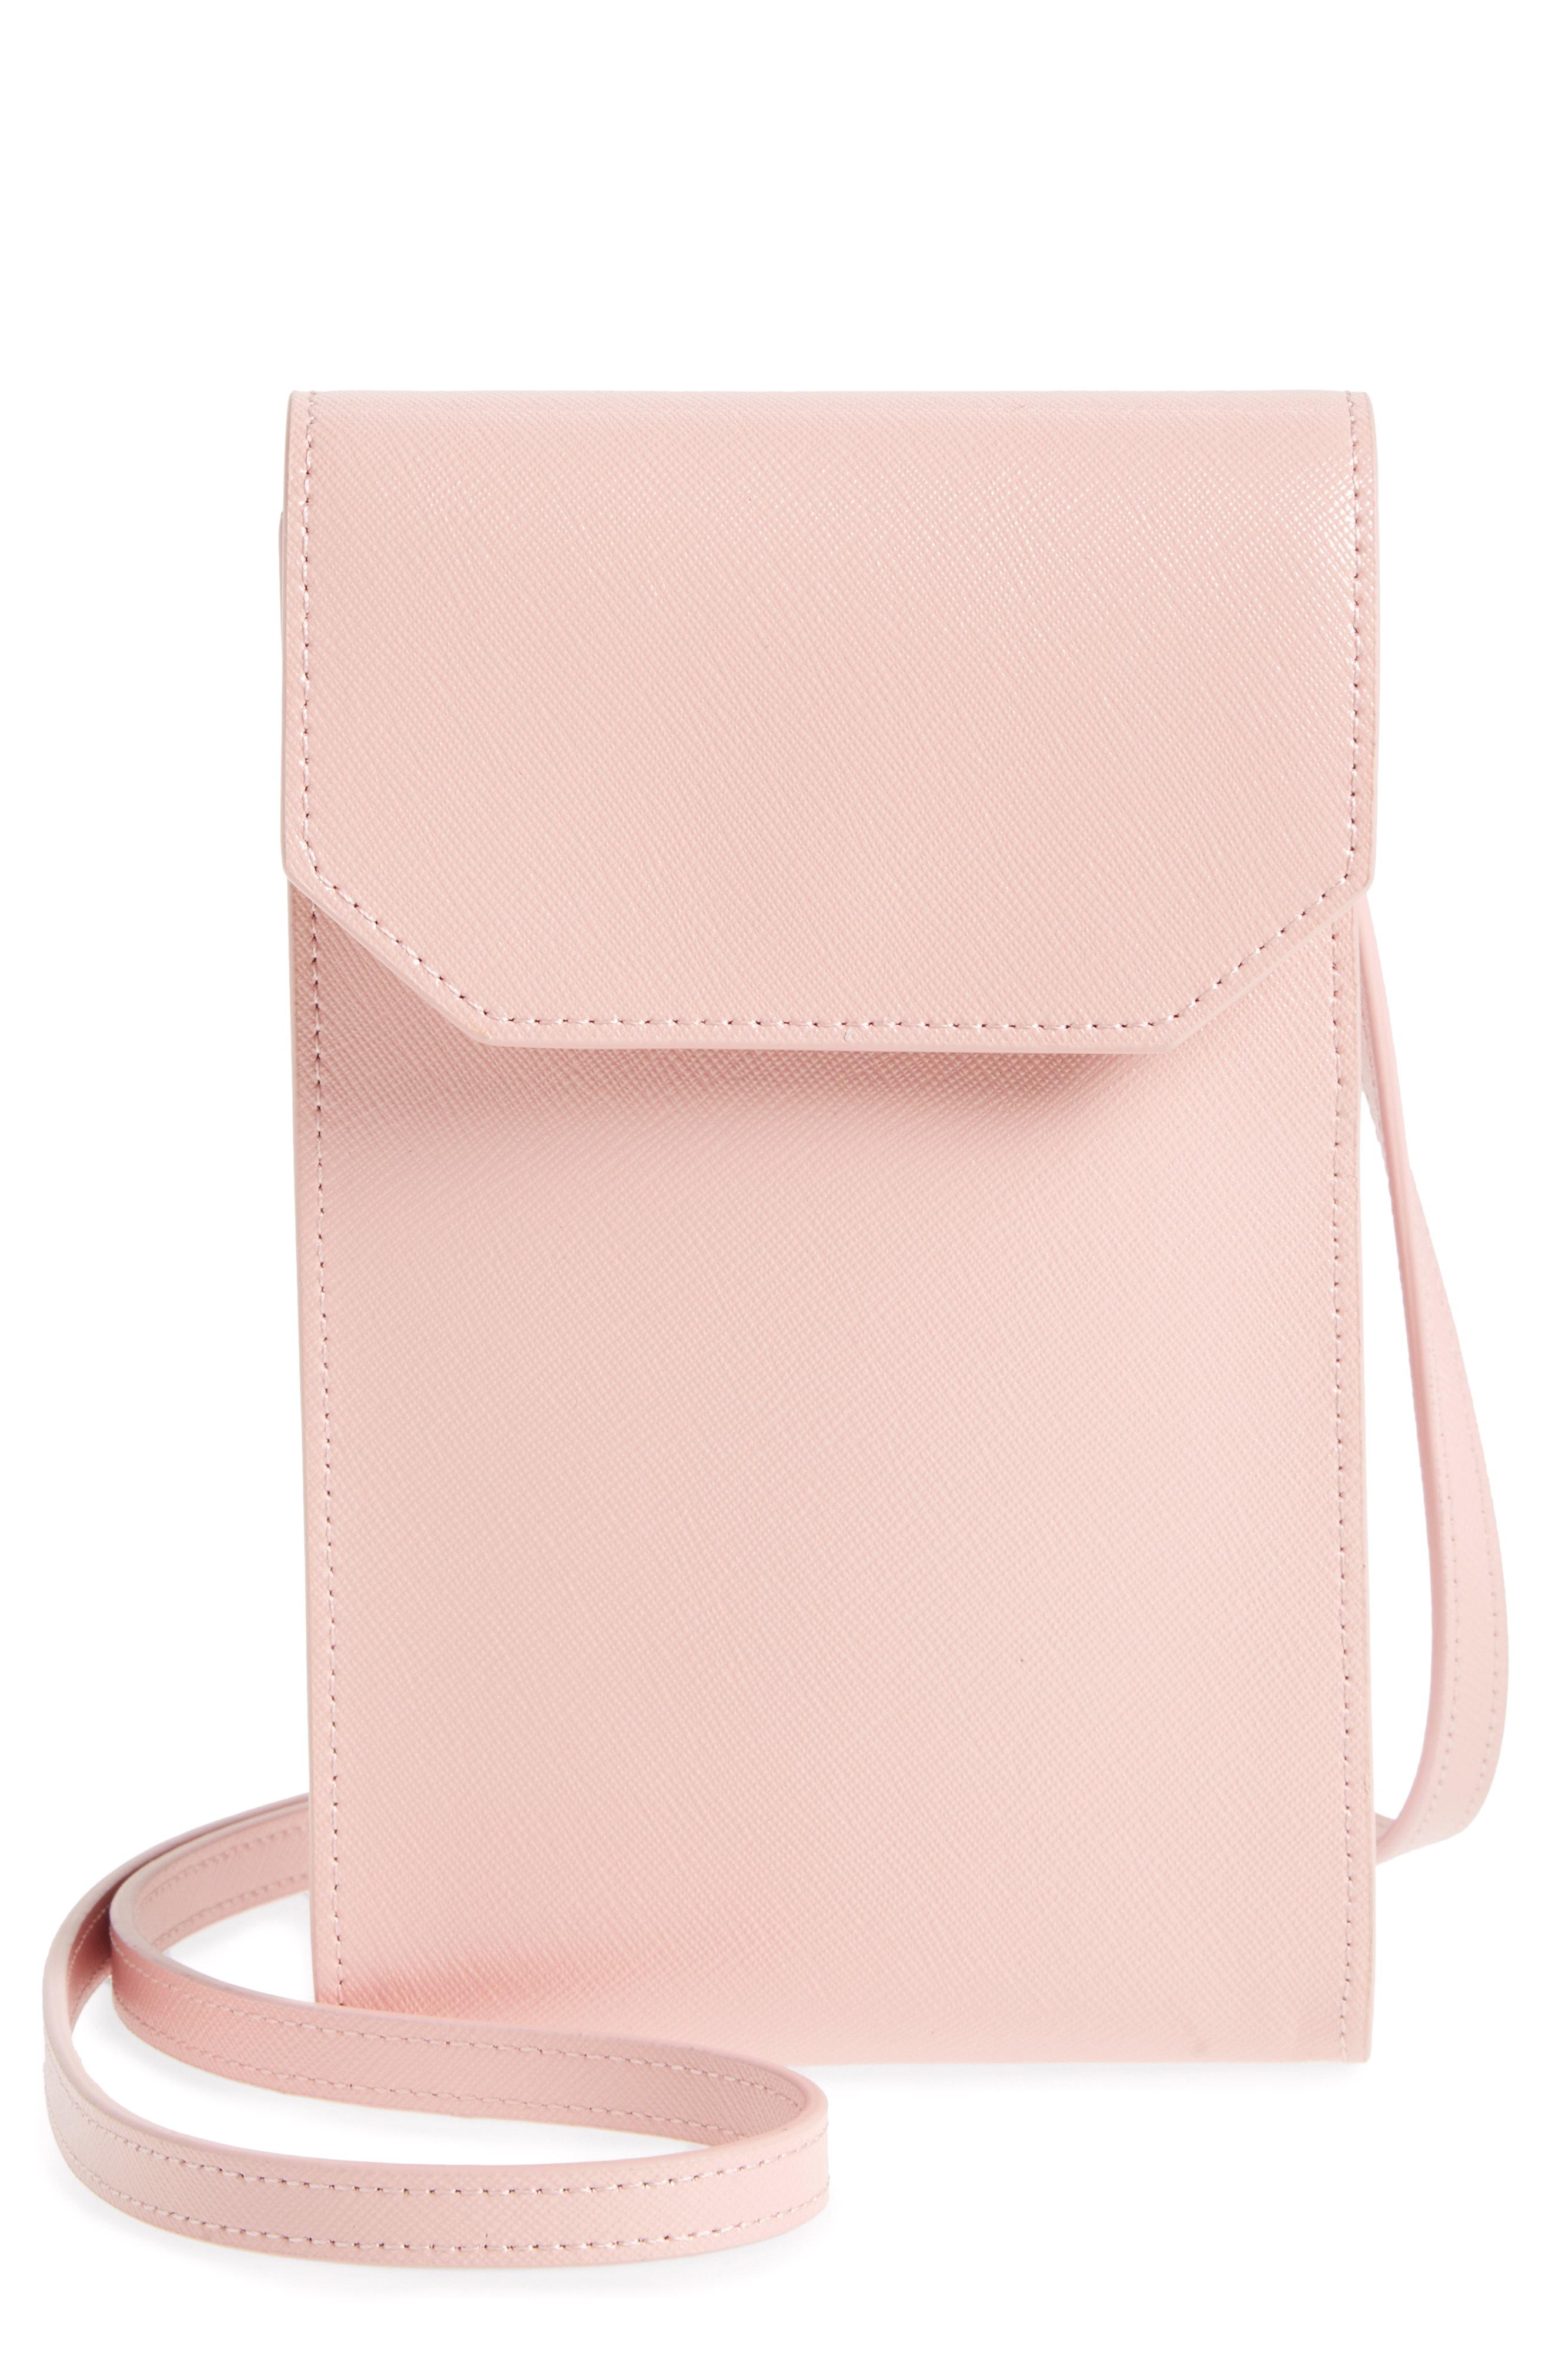 Nordstrom Leather Phone Crossbody Bag in Pink Silver (Black) - Lyst